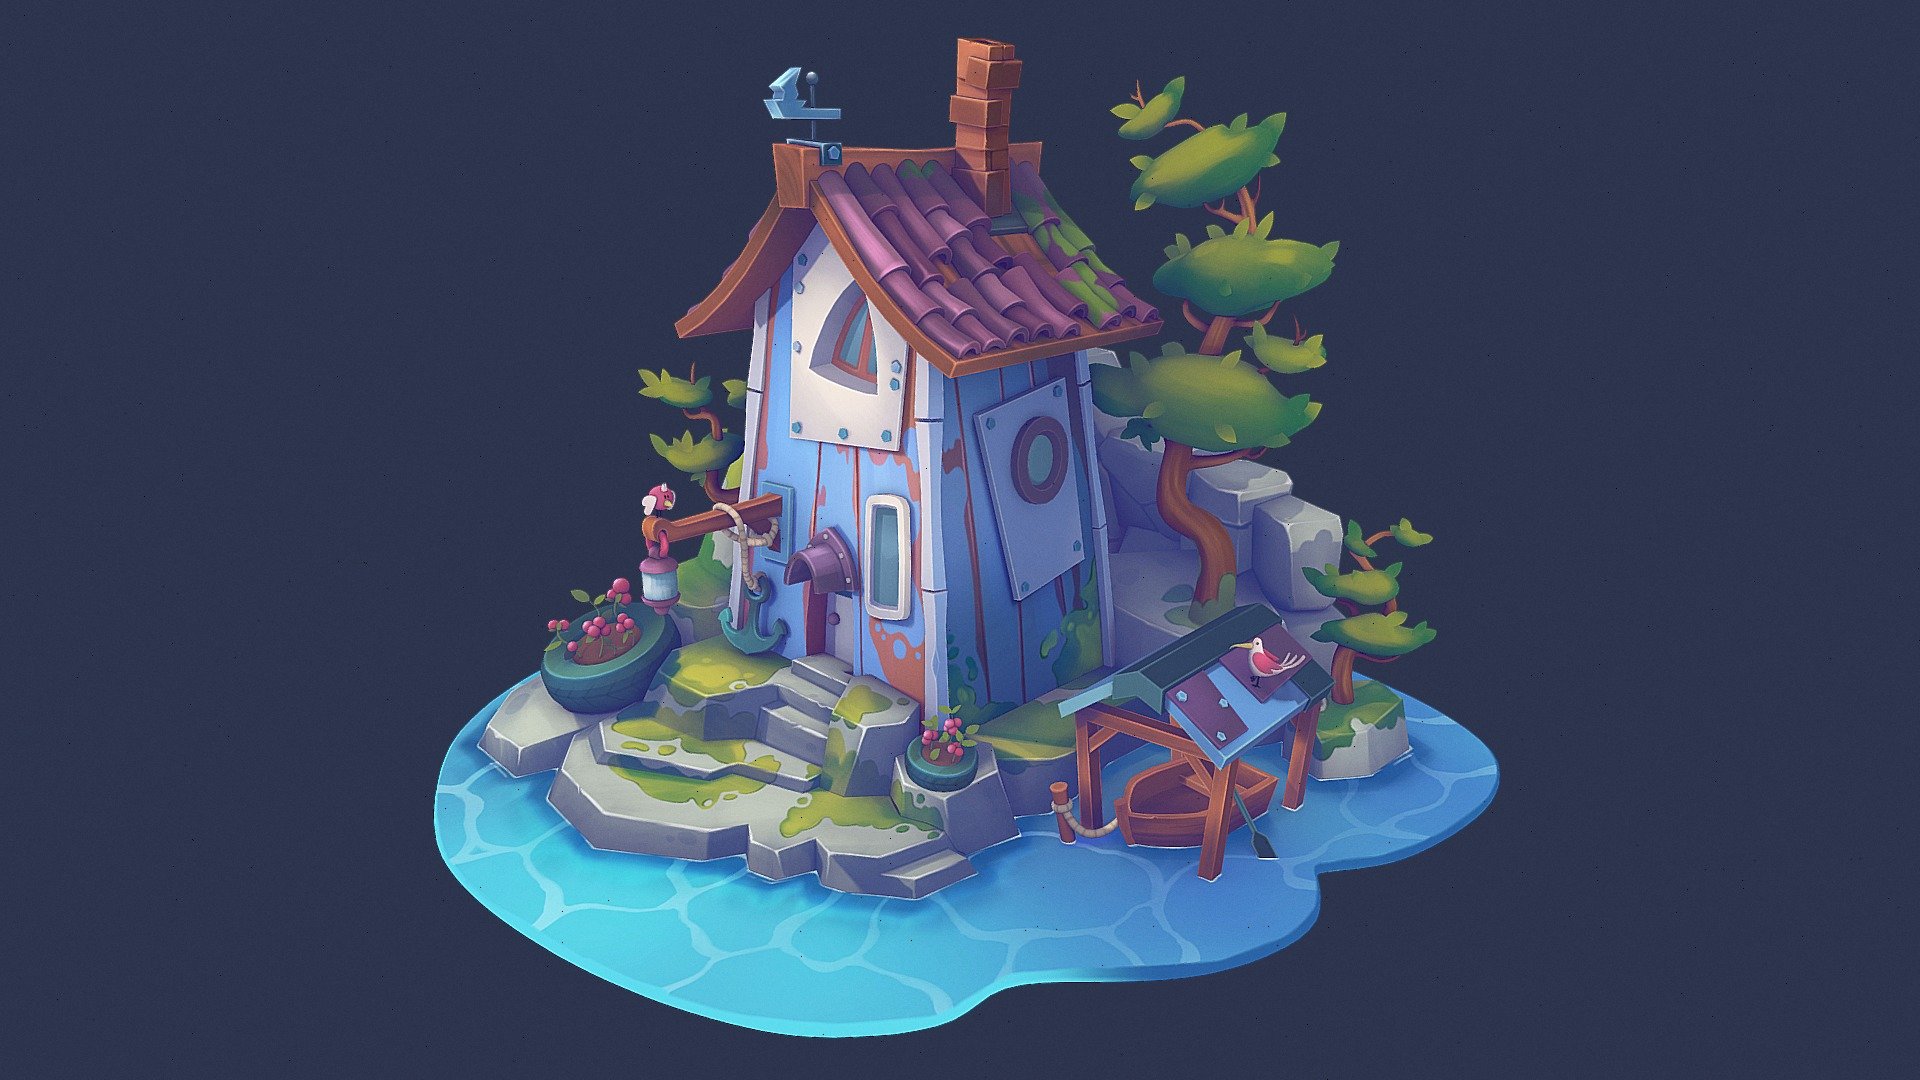 Handpainted house, unlit ! 
There is some AO details that are messed up here for no reason, gonna fix it later 💜

Concept by Natallia Vasilkova who kindly accepted that I redo it in 3D 🌿https://artstation.com/artwork/KrmNnR

Made with Blender and Substance Painter ! - Sailorman House ~ - 3D model by DetectivePacha (@S.Pacha) 3d model